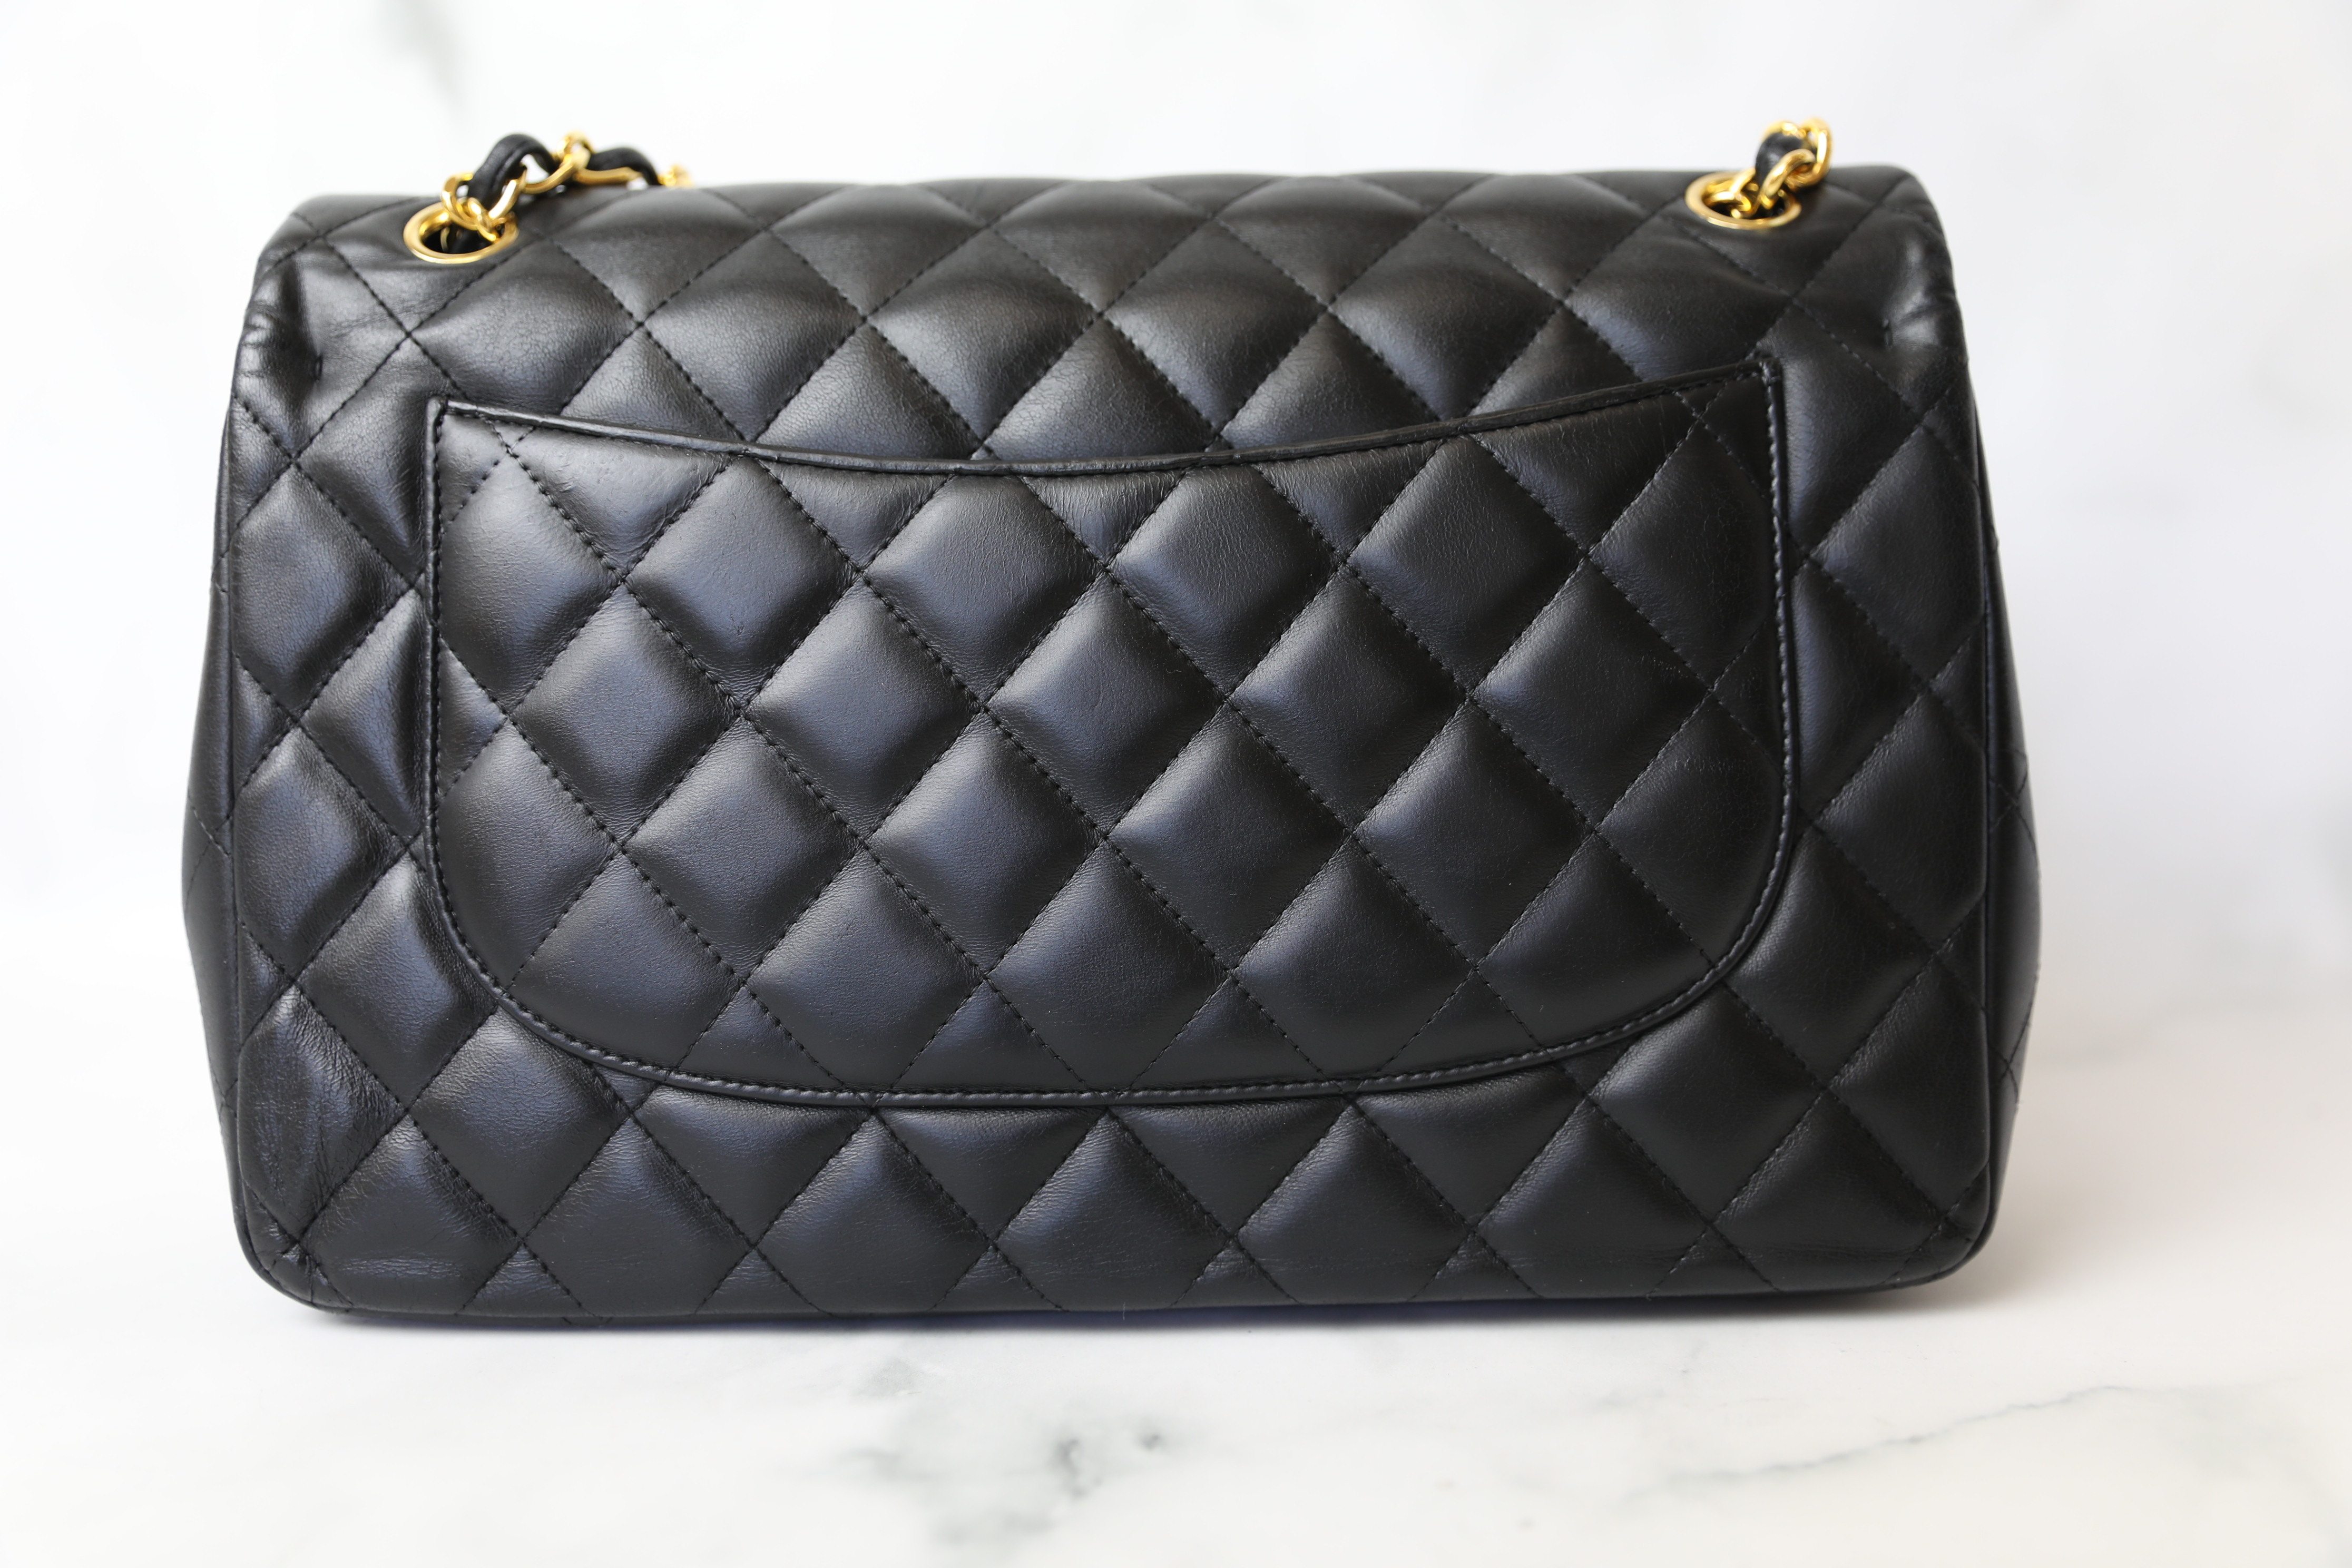 Chanel Classic Jumbo, Black Lambskin with Gold Hardware, Preowned